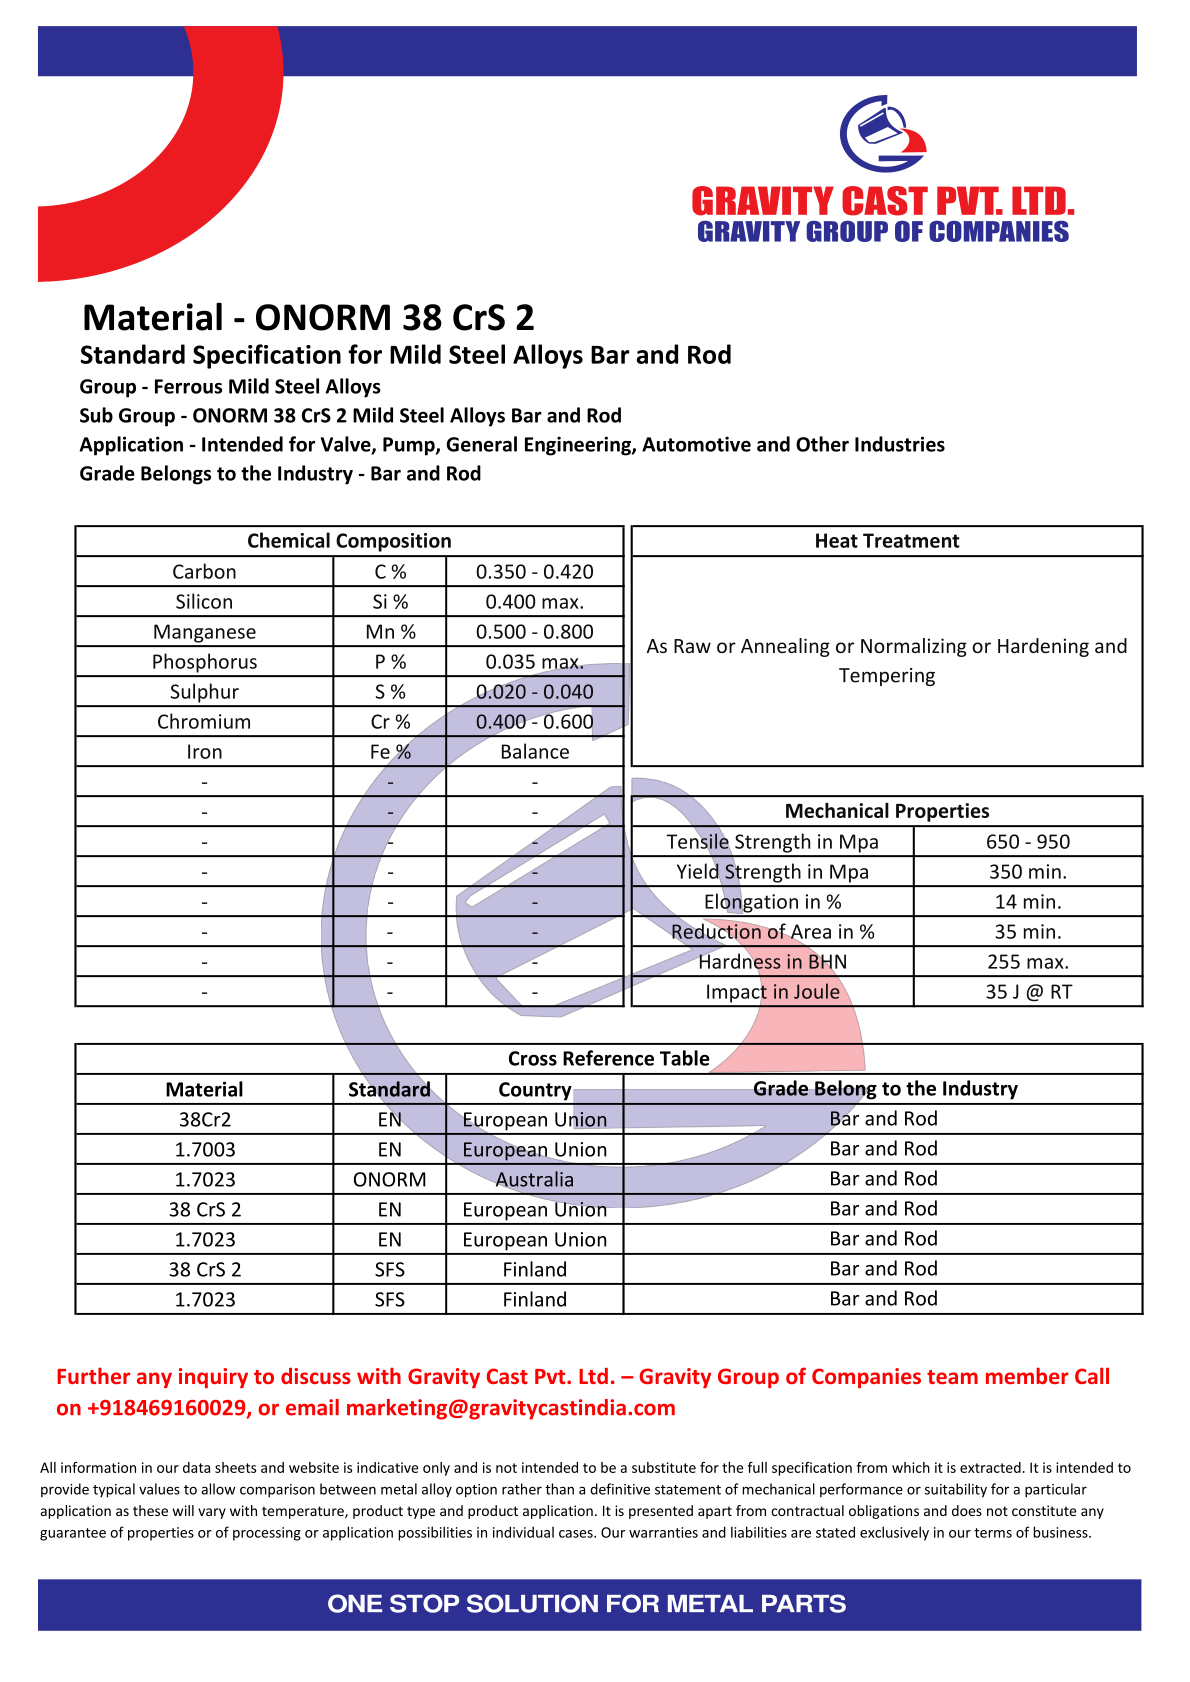 ONORM 38 CrS 2.pdf